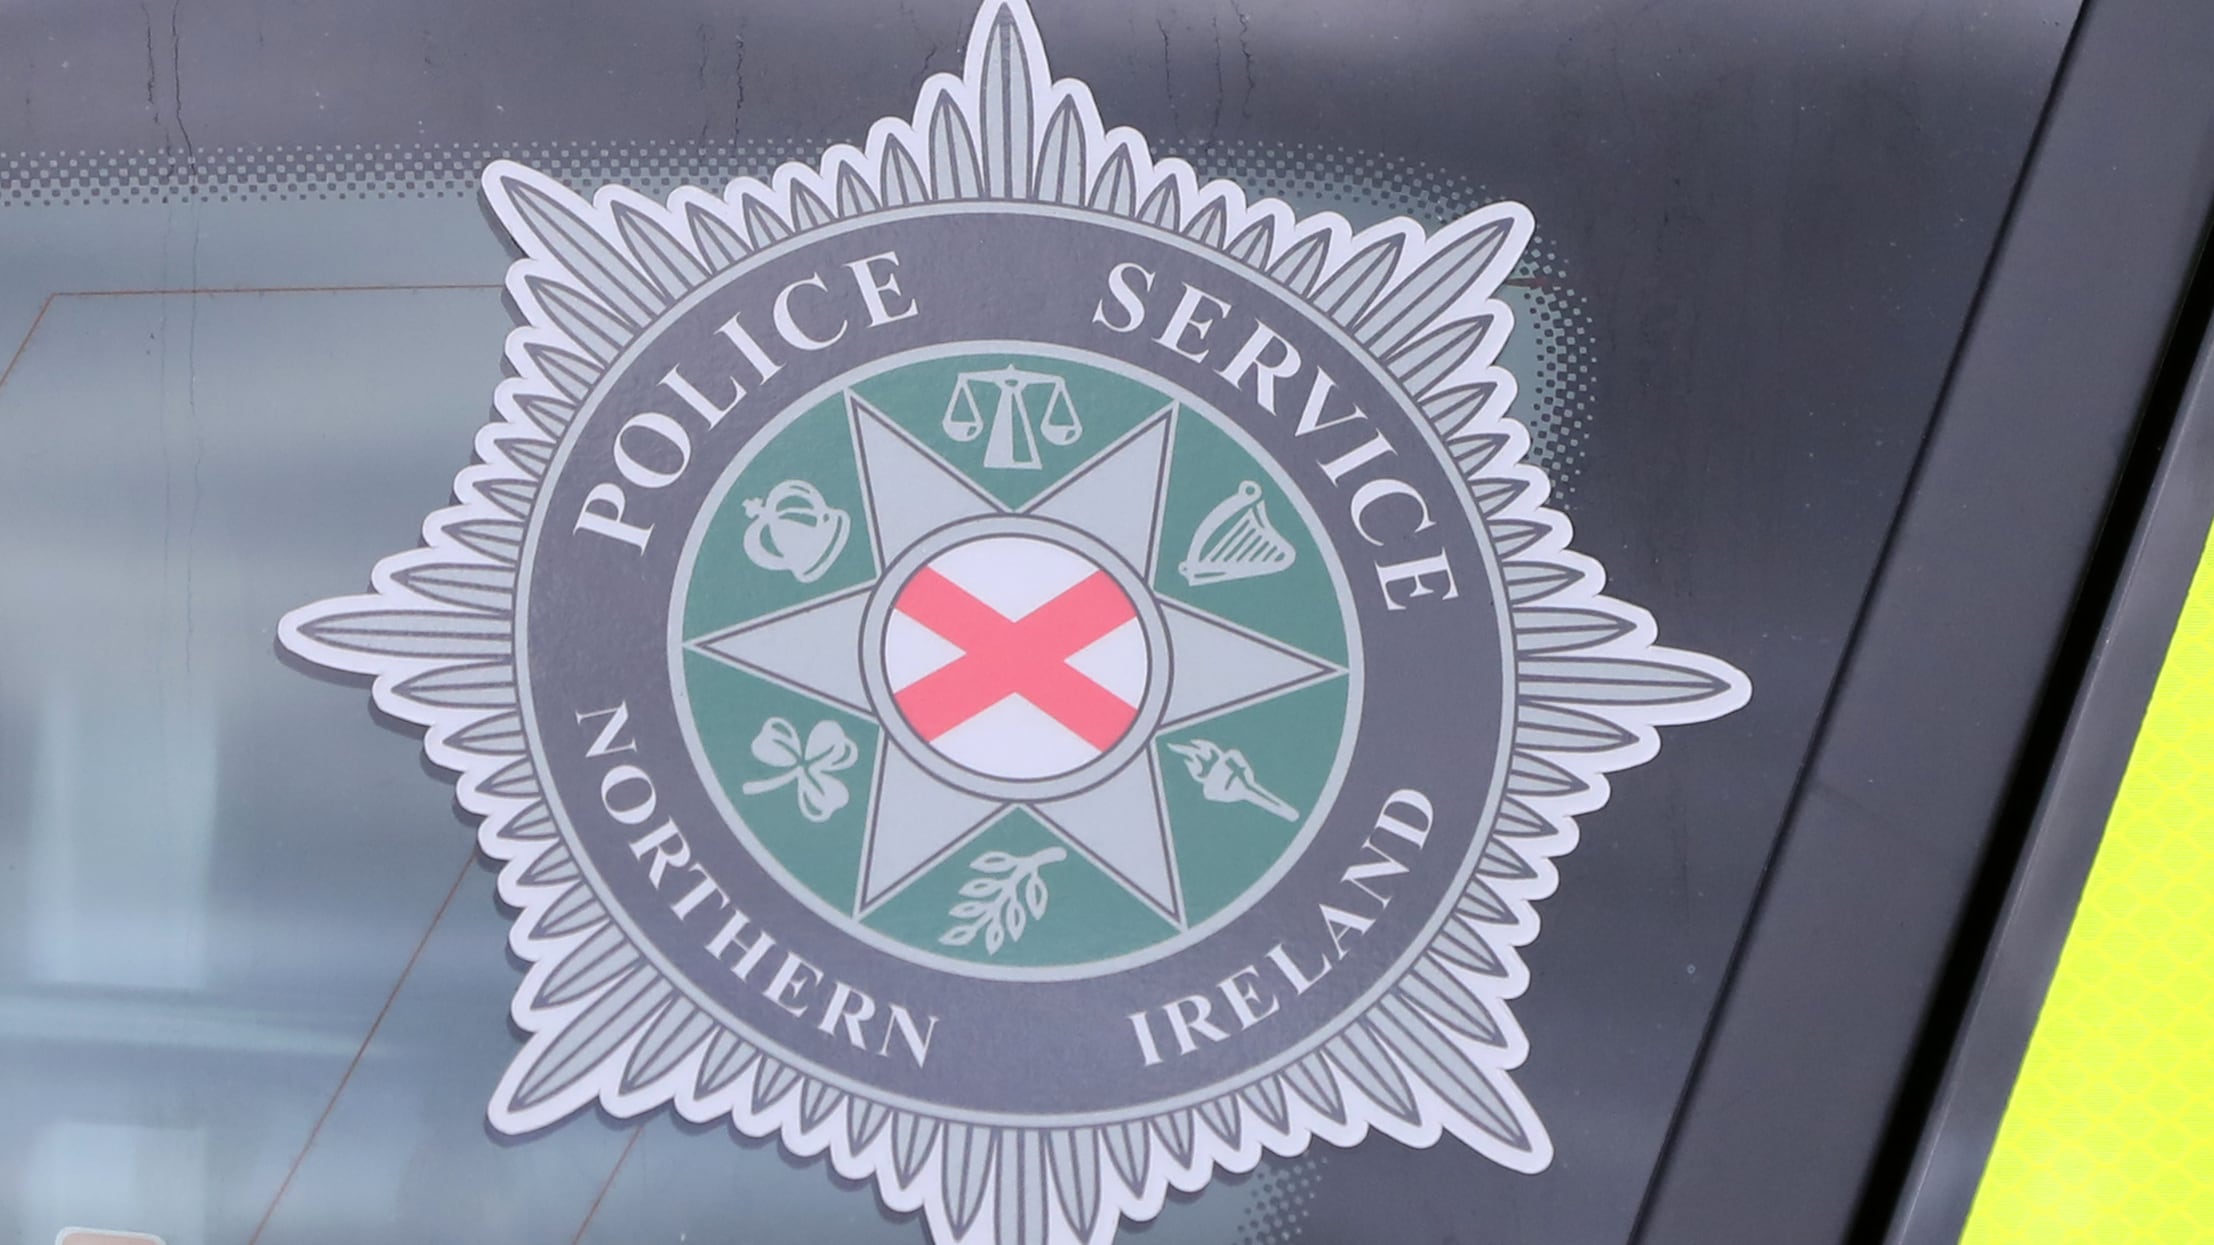 The incident happened in Newry in the early hours of Saturday